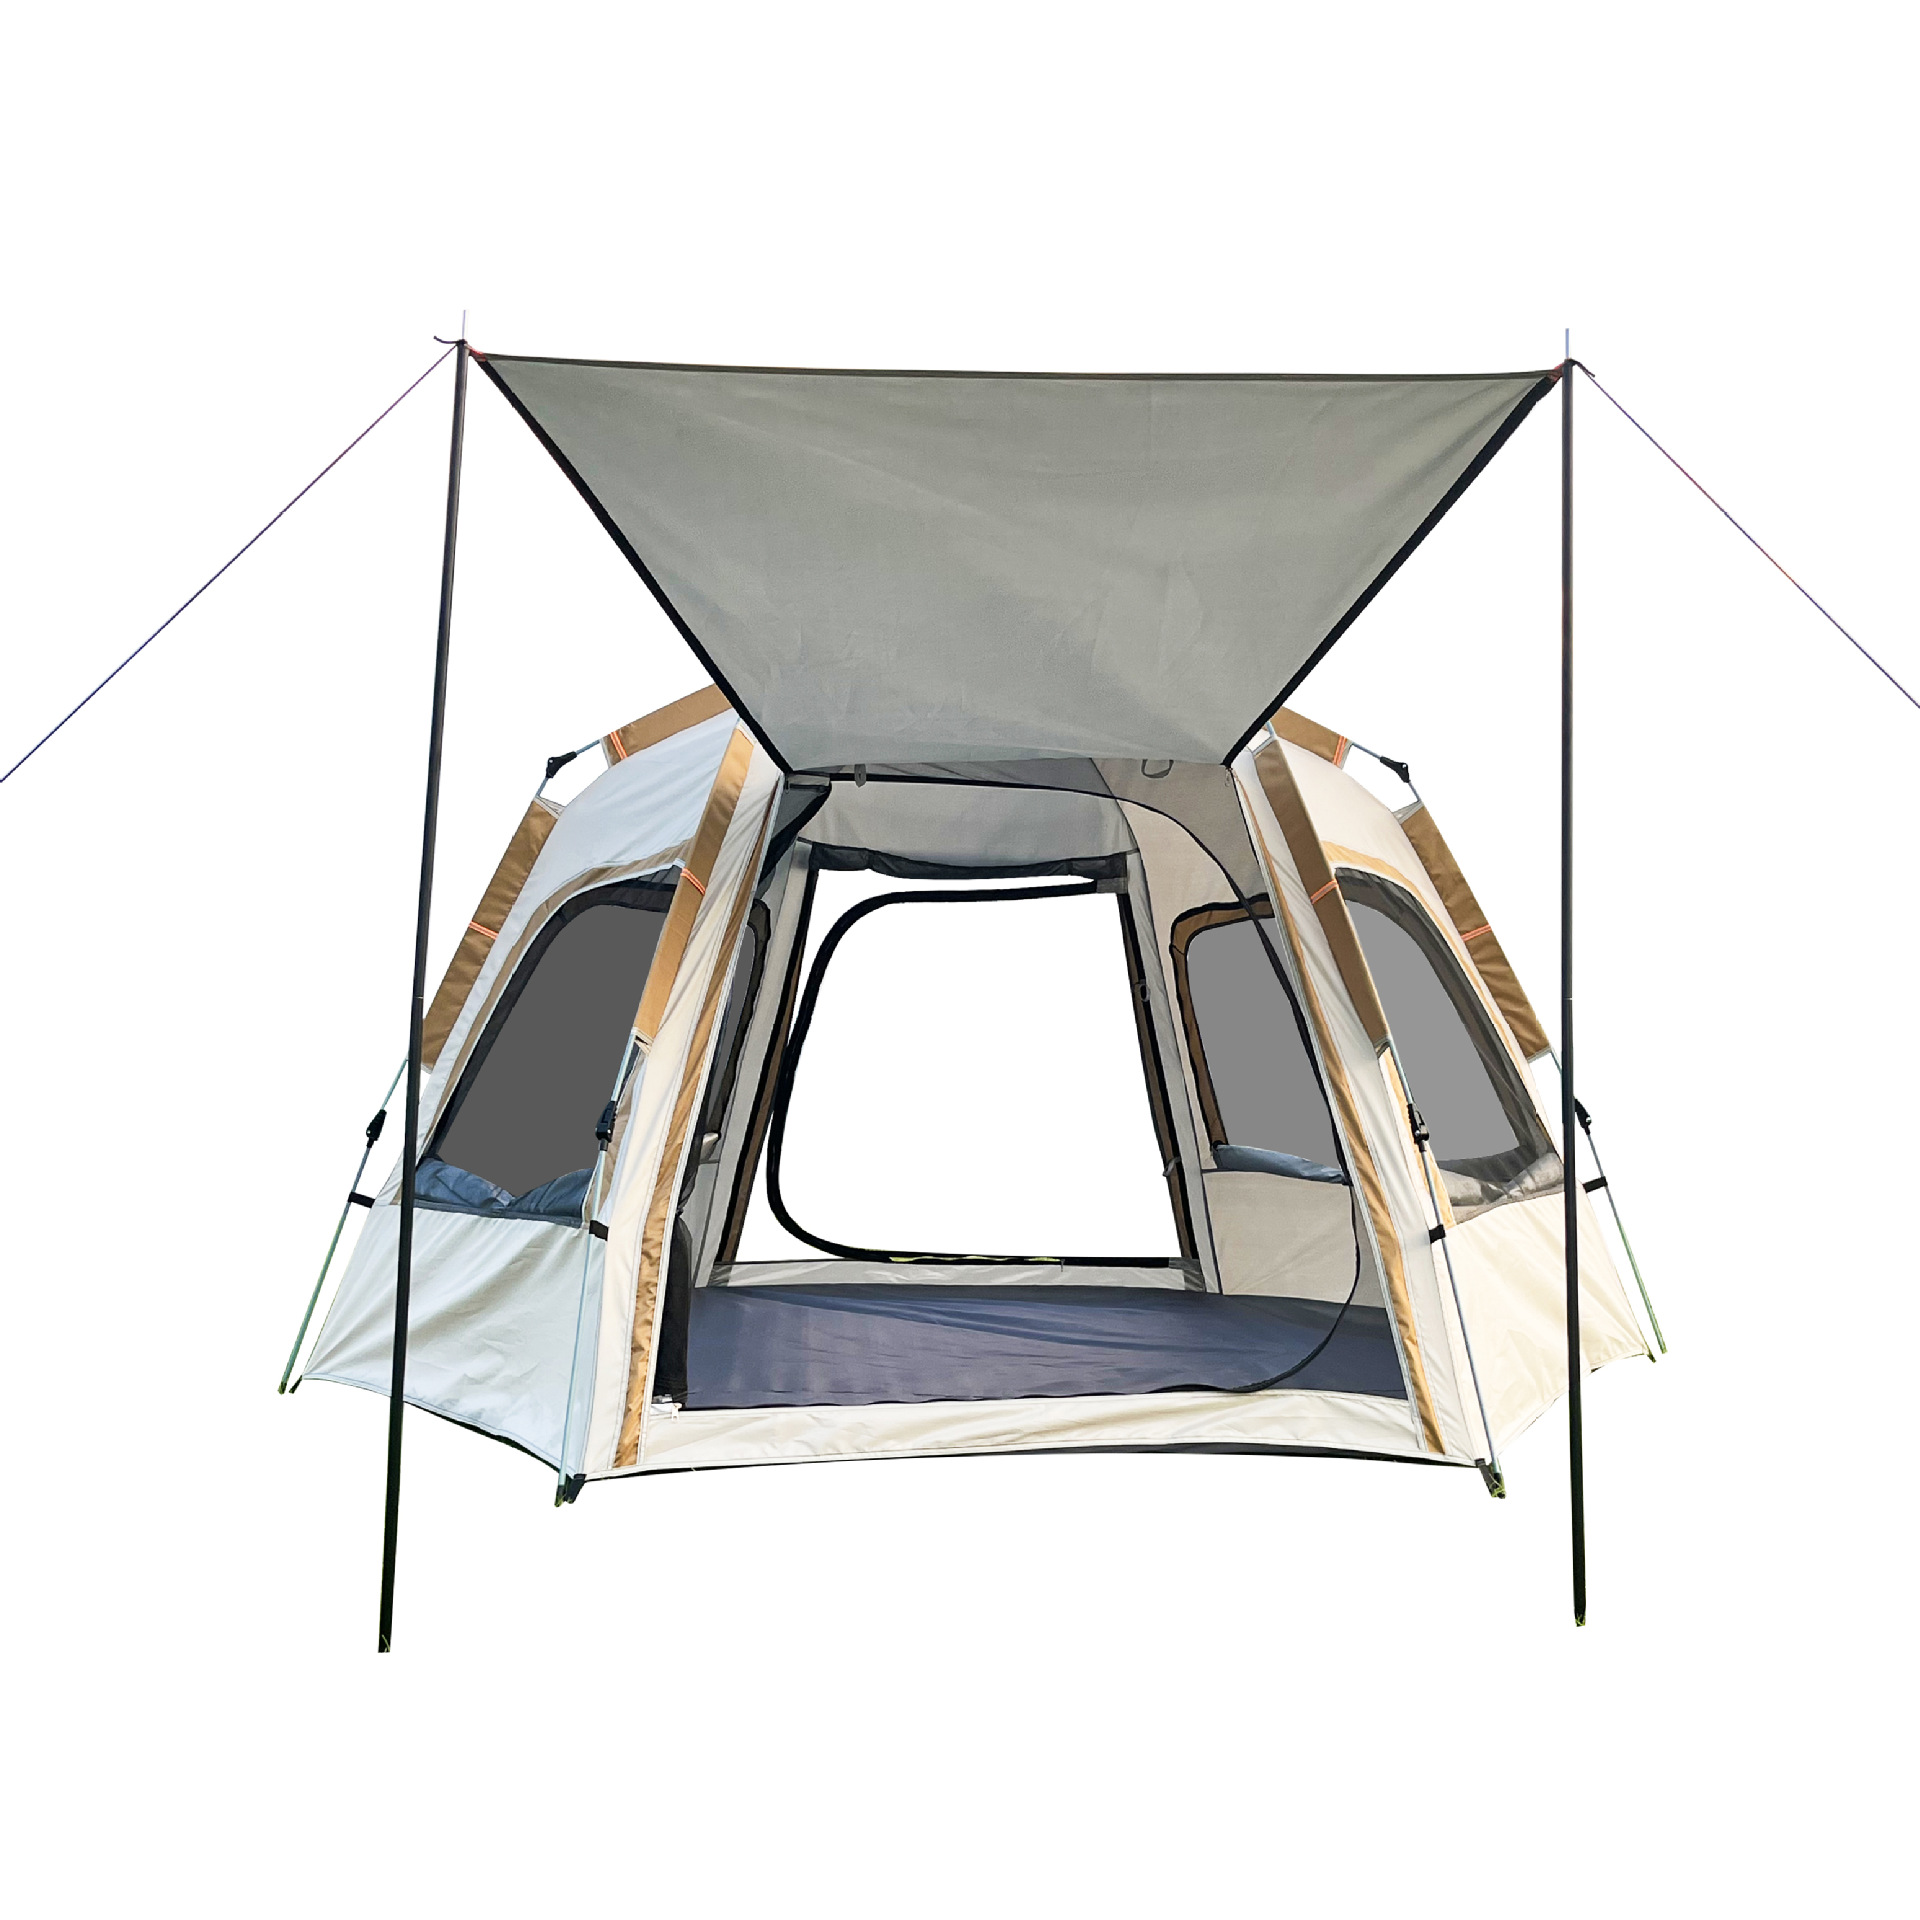 In Stock Wholesale Tent Outdoor Portable Hexagonal Folding Automatic One Bedroom One Living Room Park Camping Thickened Ventilation